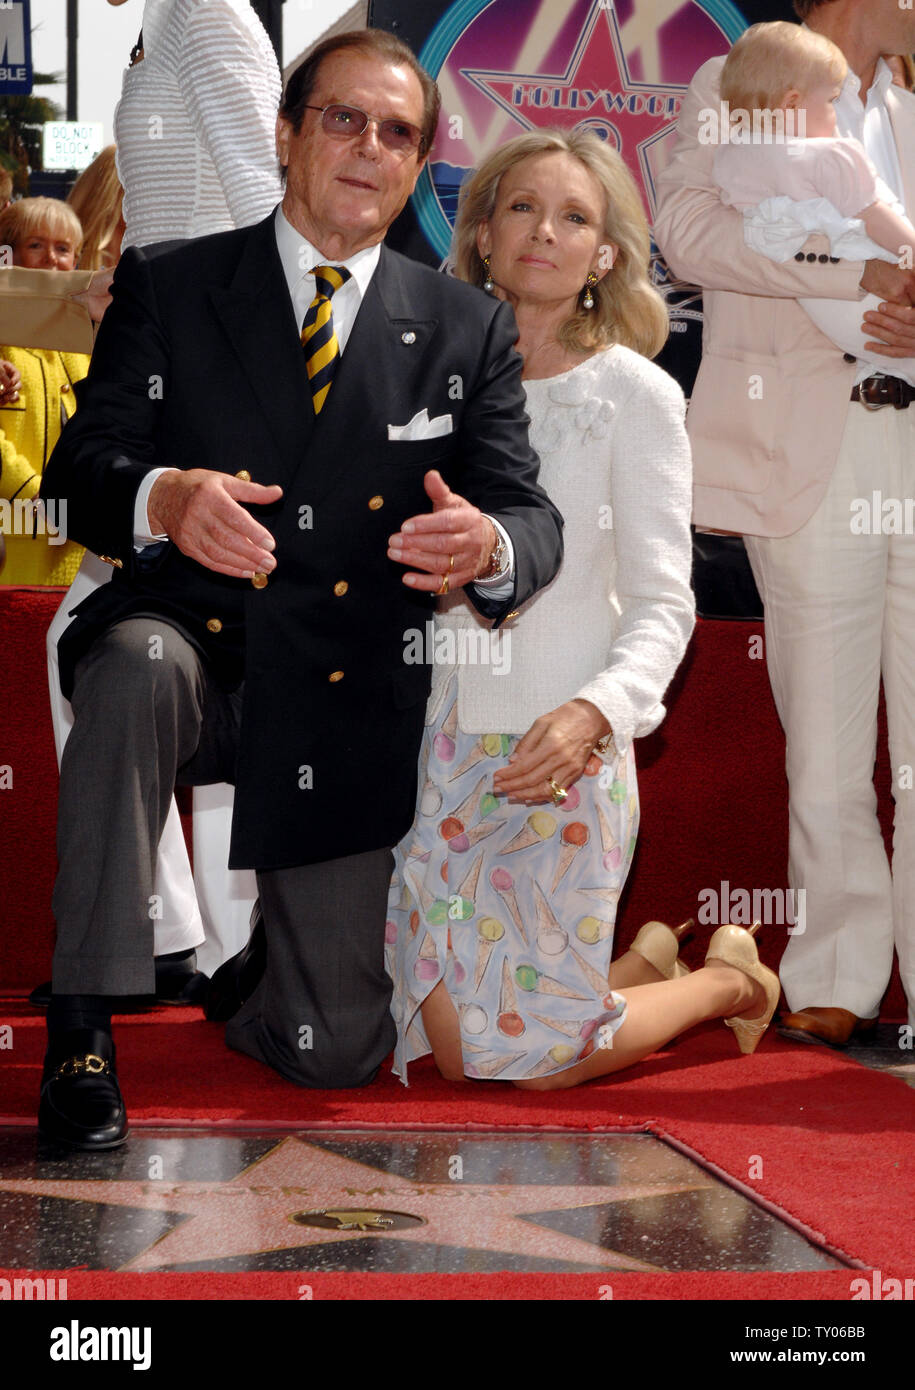 British actor Sir Roger Moore (L) and his wife, actress Christina Tholstrup pose during an unveiling ceremony honoring him with the 2,350th star on the Hollywood Walk of Fame in Los Angeles on October 11, 2007. Moore appeared in 1973 in his first James Bond film 'Live and Let Die.' He also starred as Simon Templar in the TV series 'The Saint.'  (UPI Photo/Jim Ruymen) Stock Photo